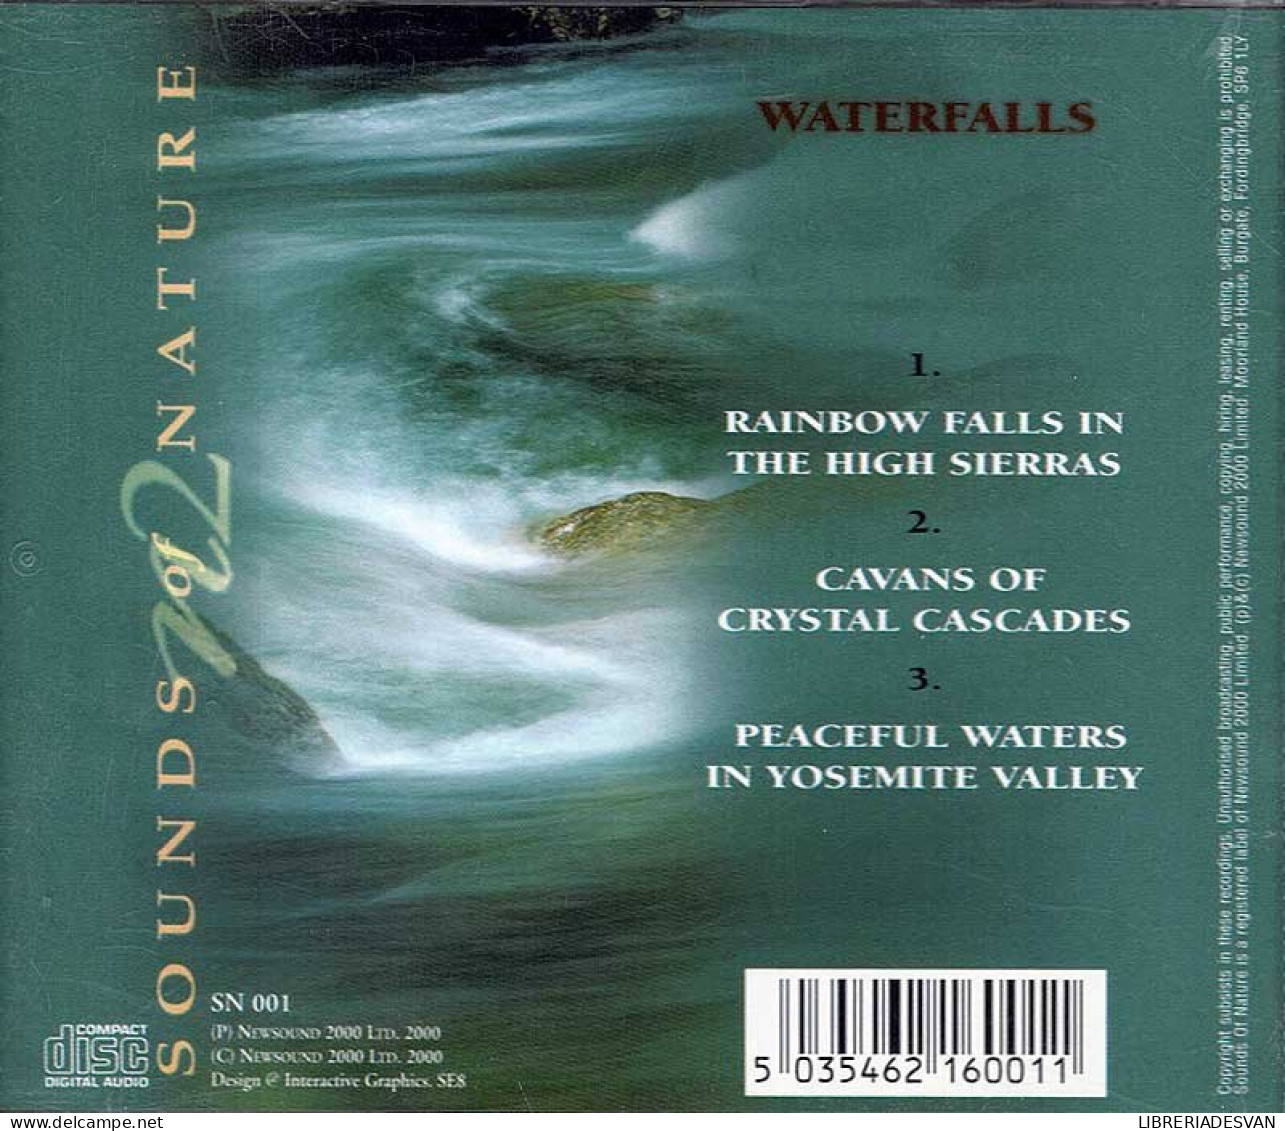 Paul Rayner-Brown - Waterfalls - Sounds Of Nature. CD - New Age